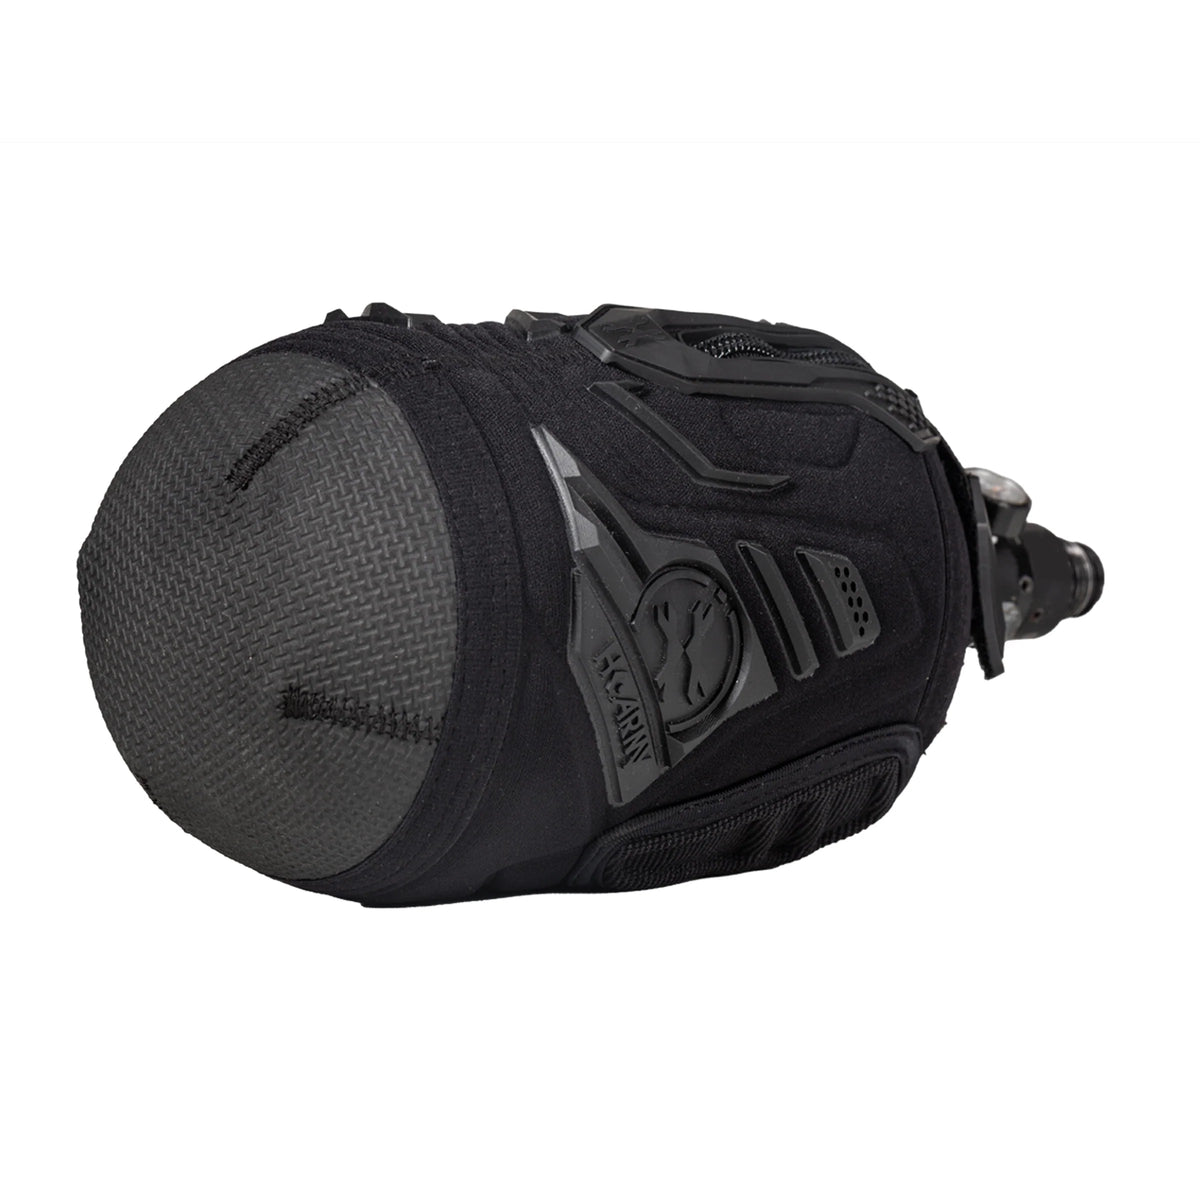 Paintball air tank cover / sleeve | hardline armored - Color: black - blackout